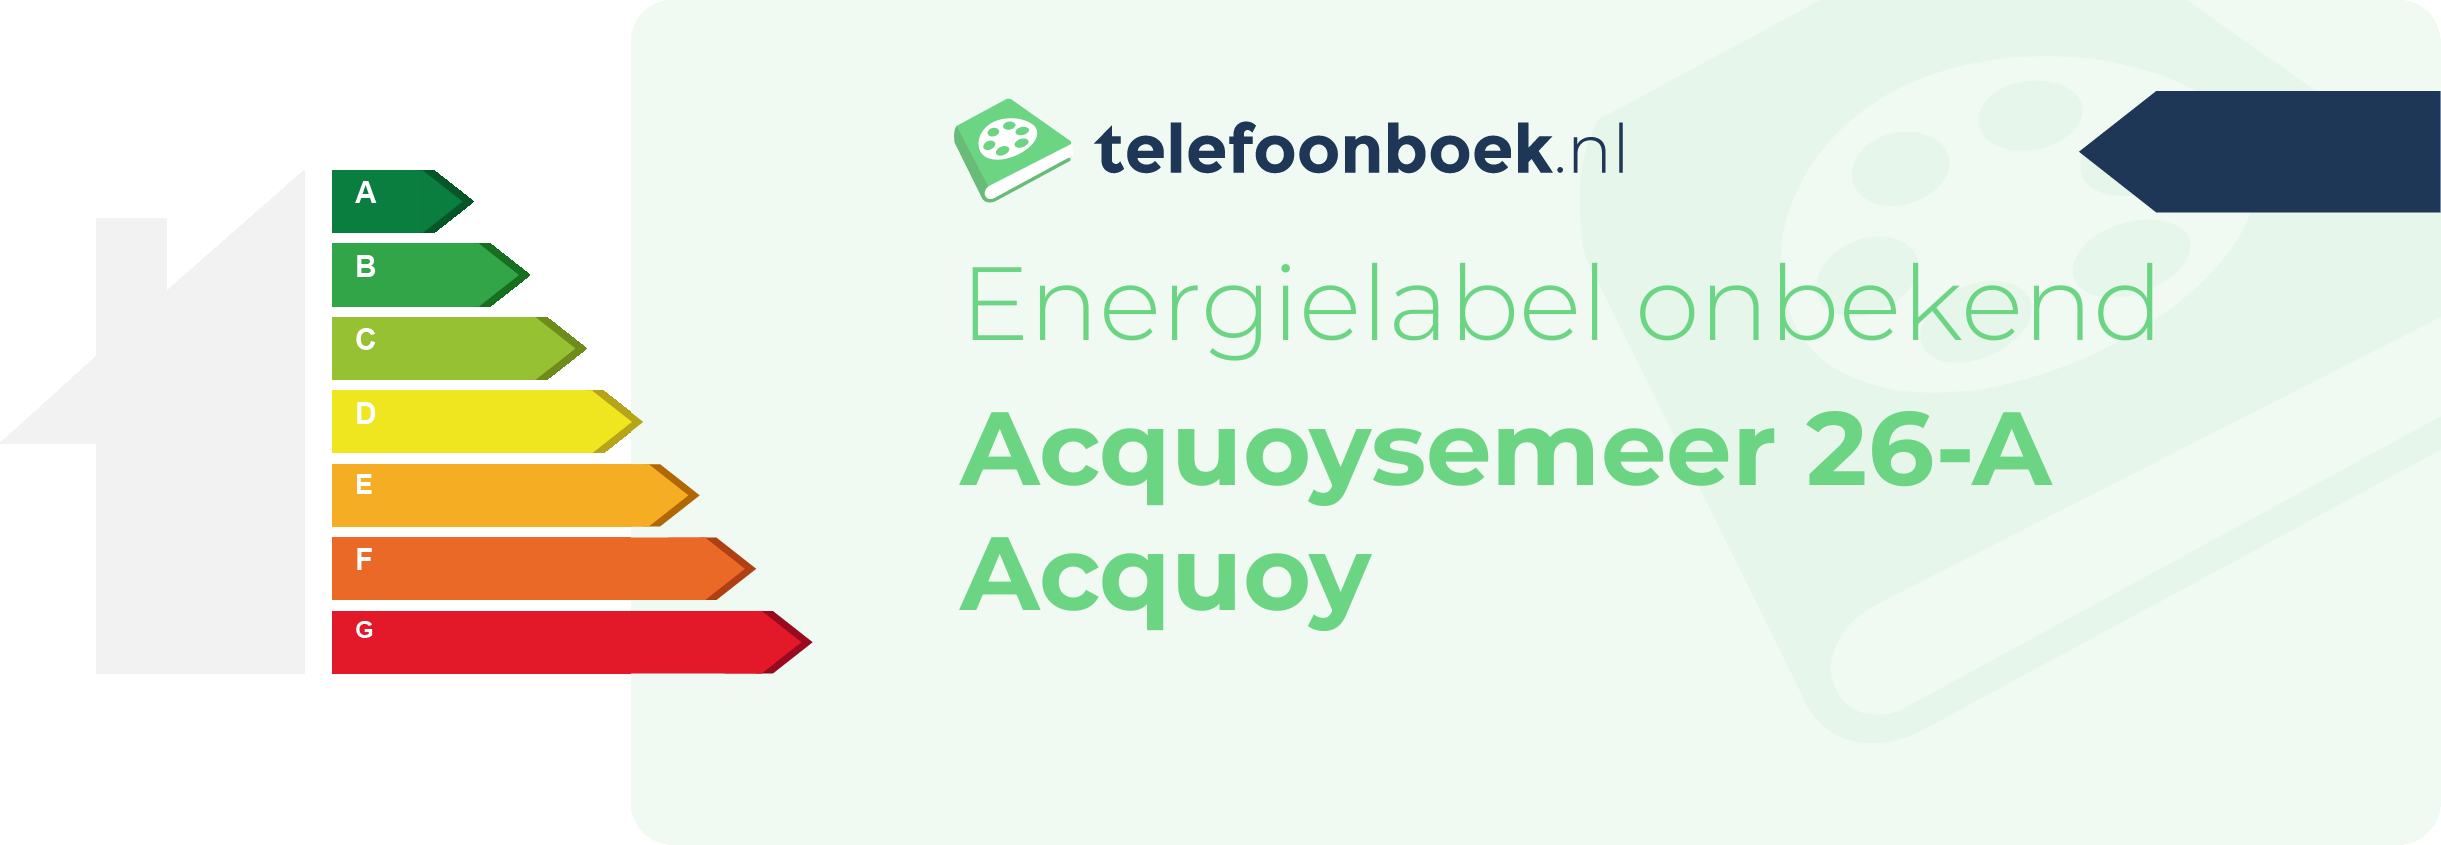 Energielabel Acquoysemeer 26-A Acquoy